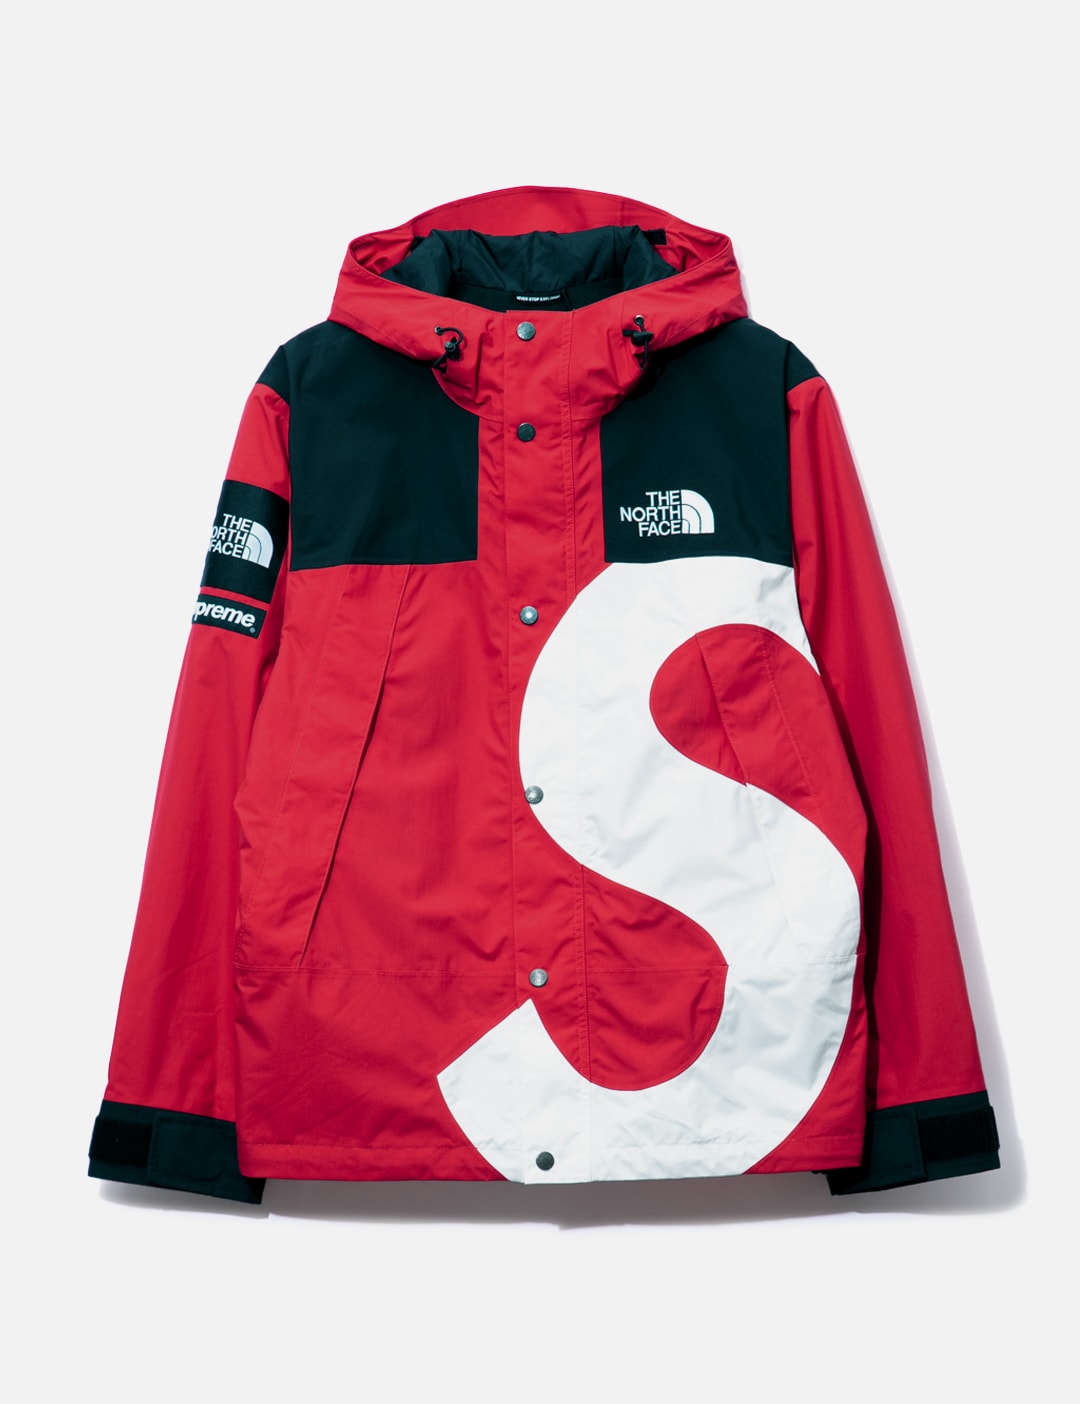 Supreme - Supreme x The North Face FW20 Mountain Jacket | HBX - Globally Curated Fashion and Lifestyle by